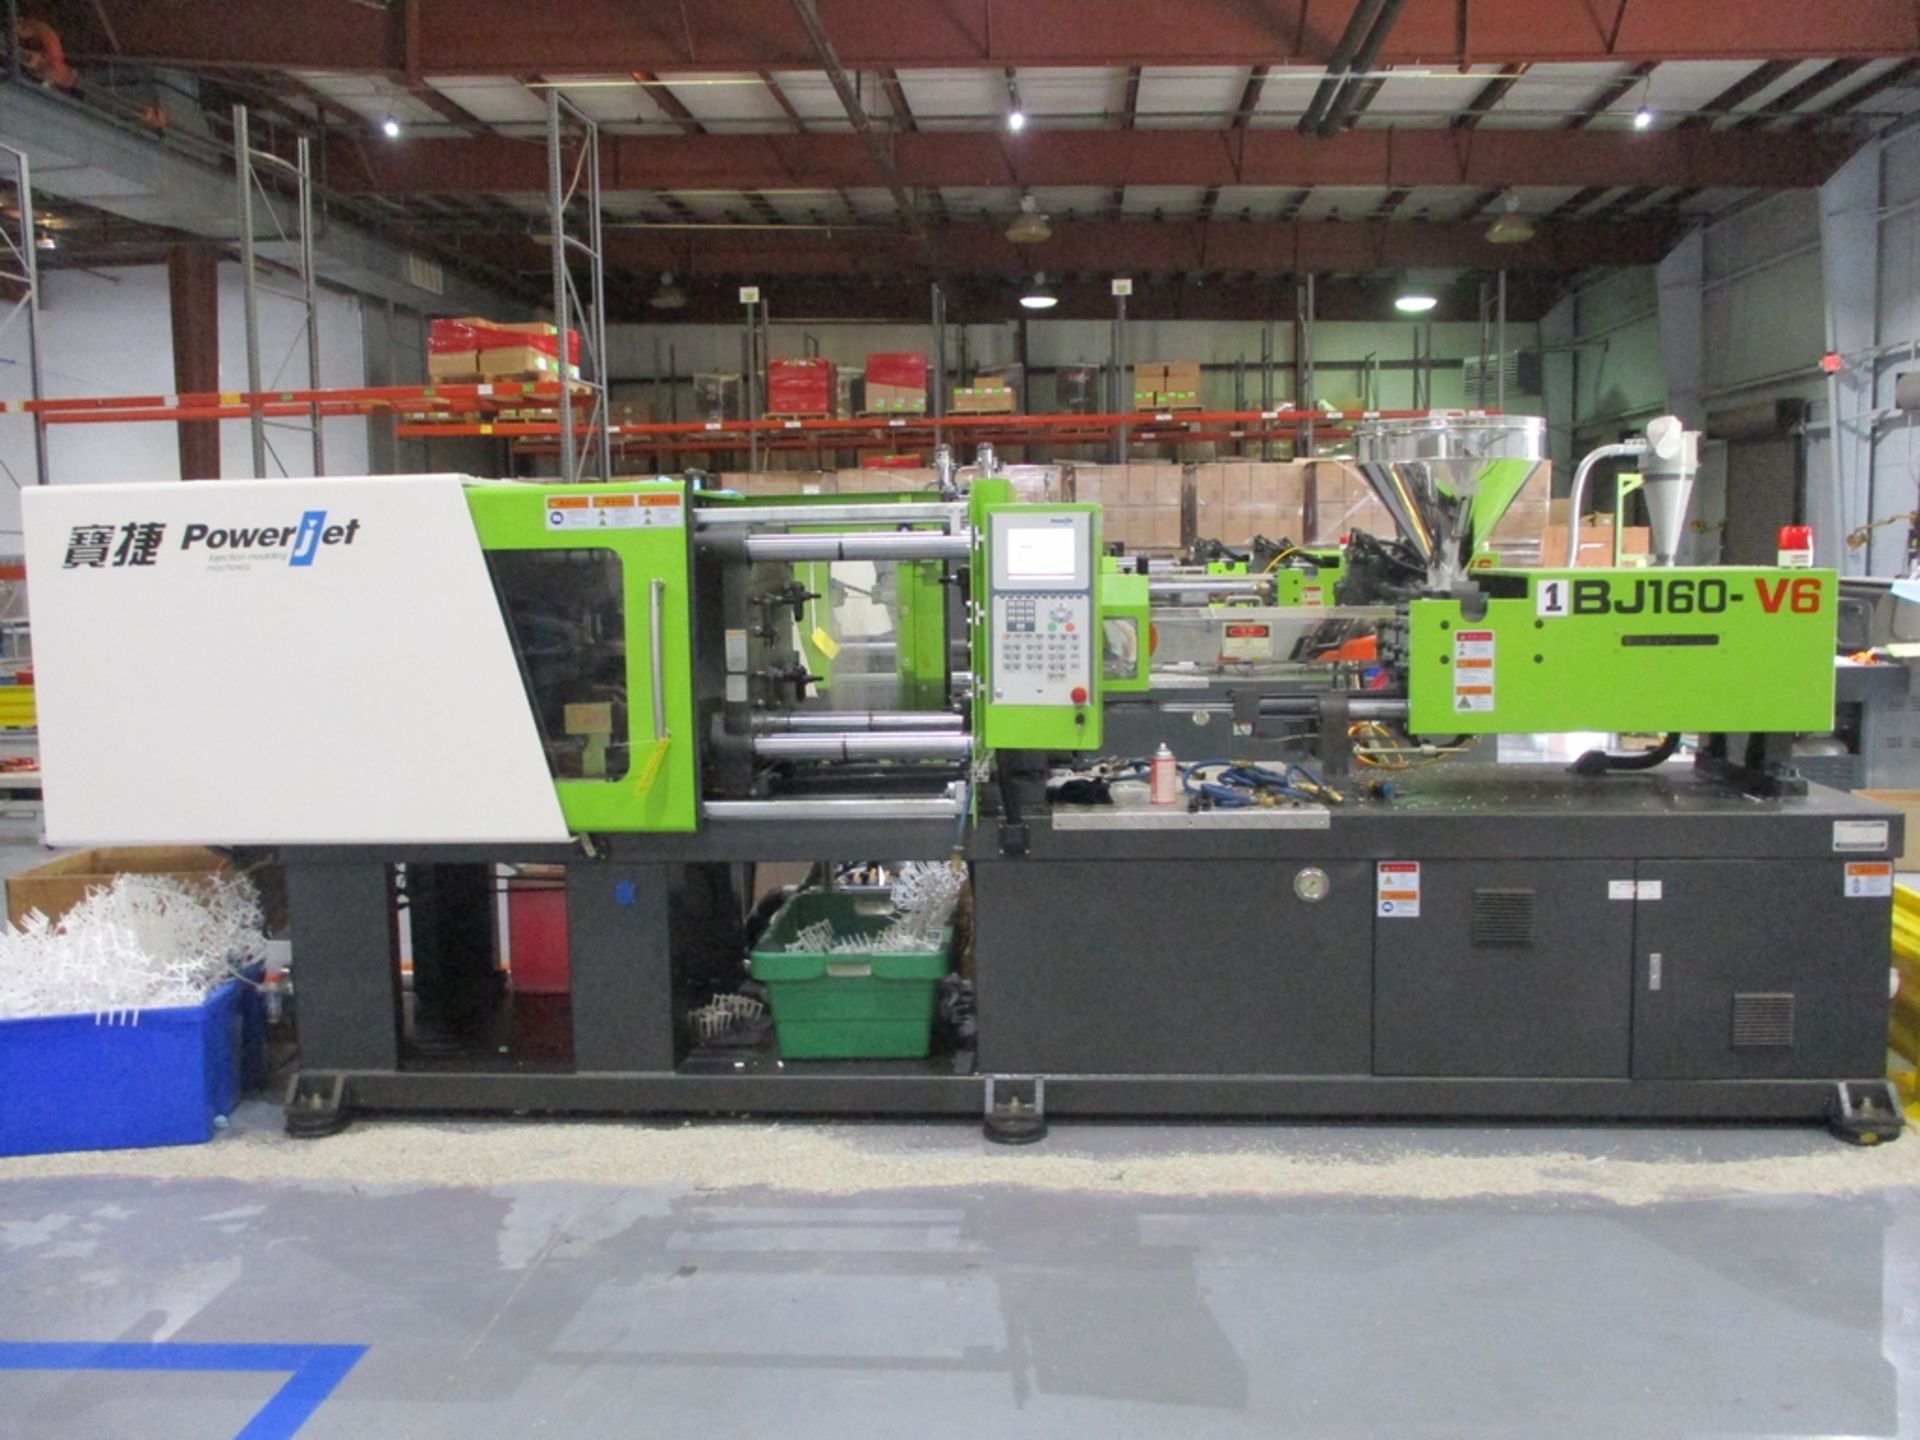 Powerjet BJ160-V6 160-Ton Injection Molding Machine - Variable Pump; Clamping Force: 160 Ton; - Image 2 of 15